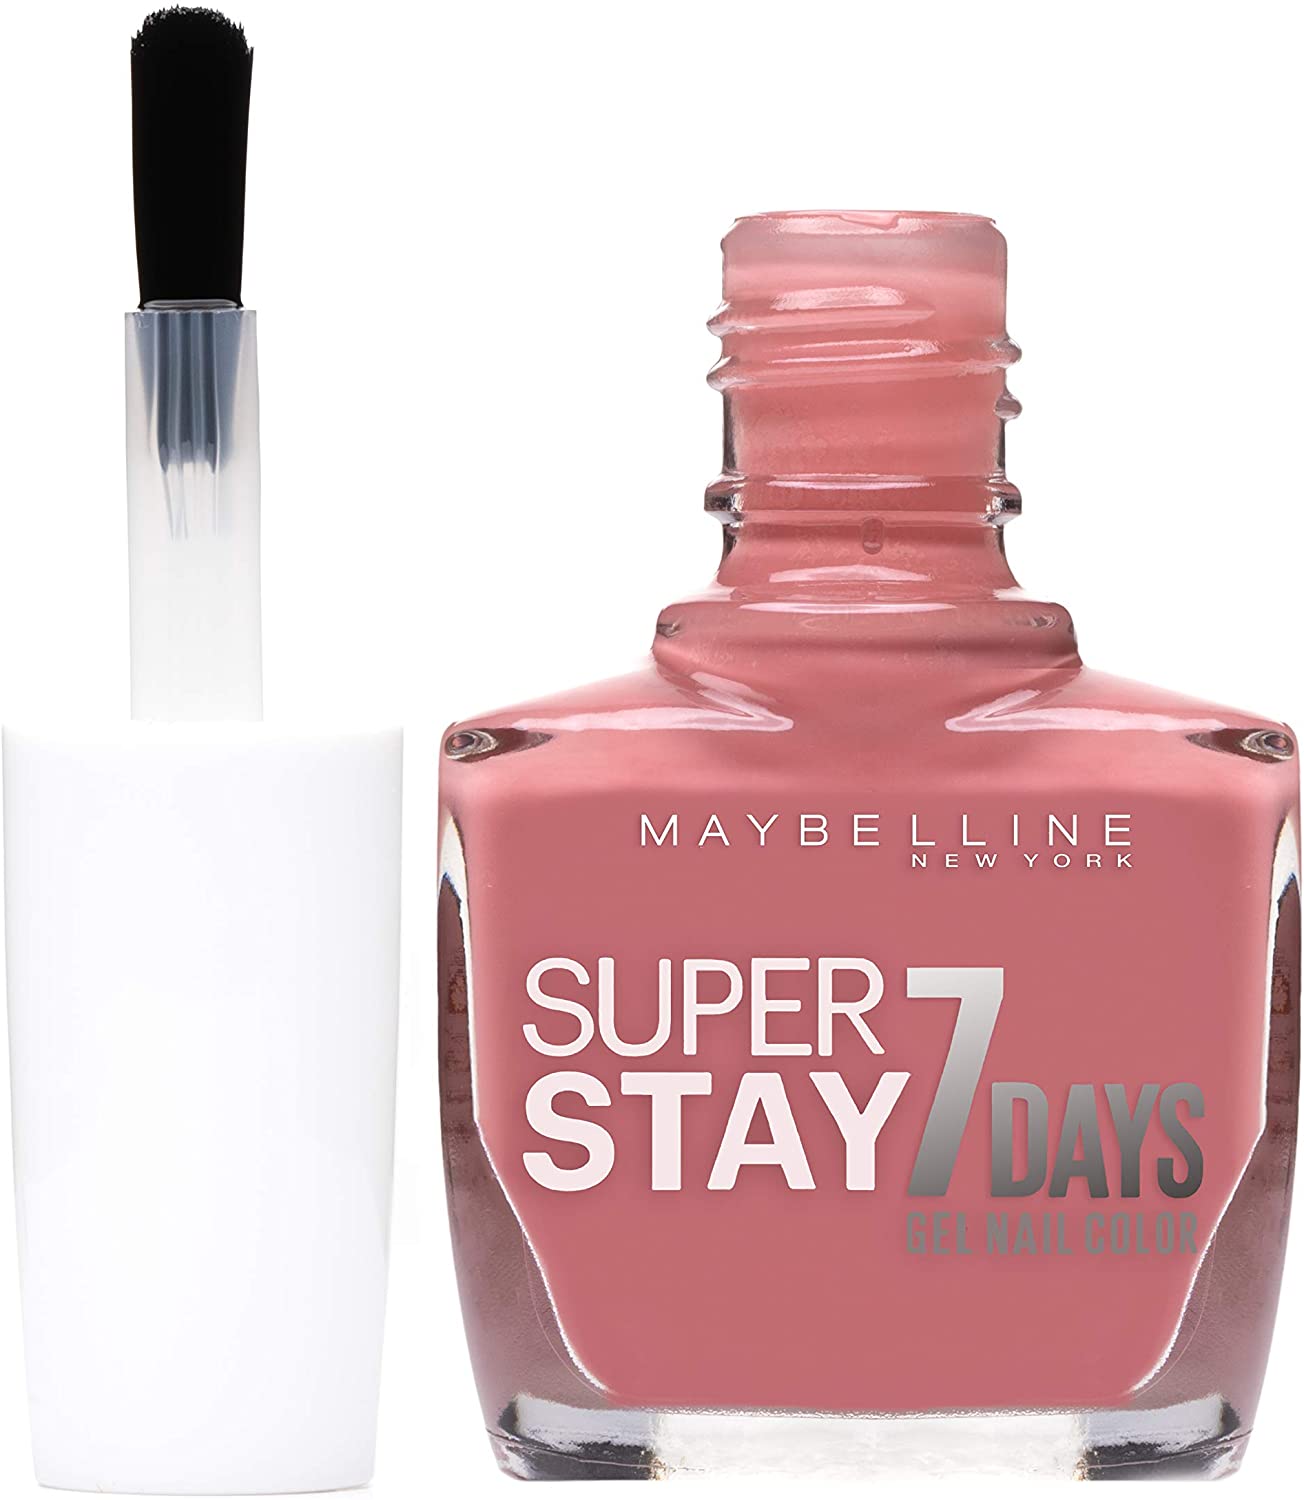 Maybelline SuperStay 7 Days Nail Polish 135 Nude Rose